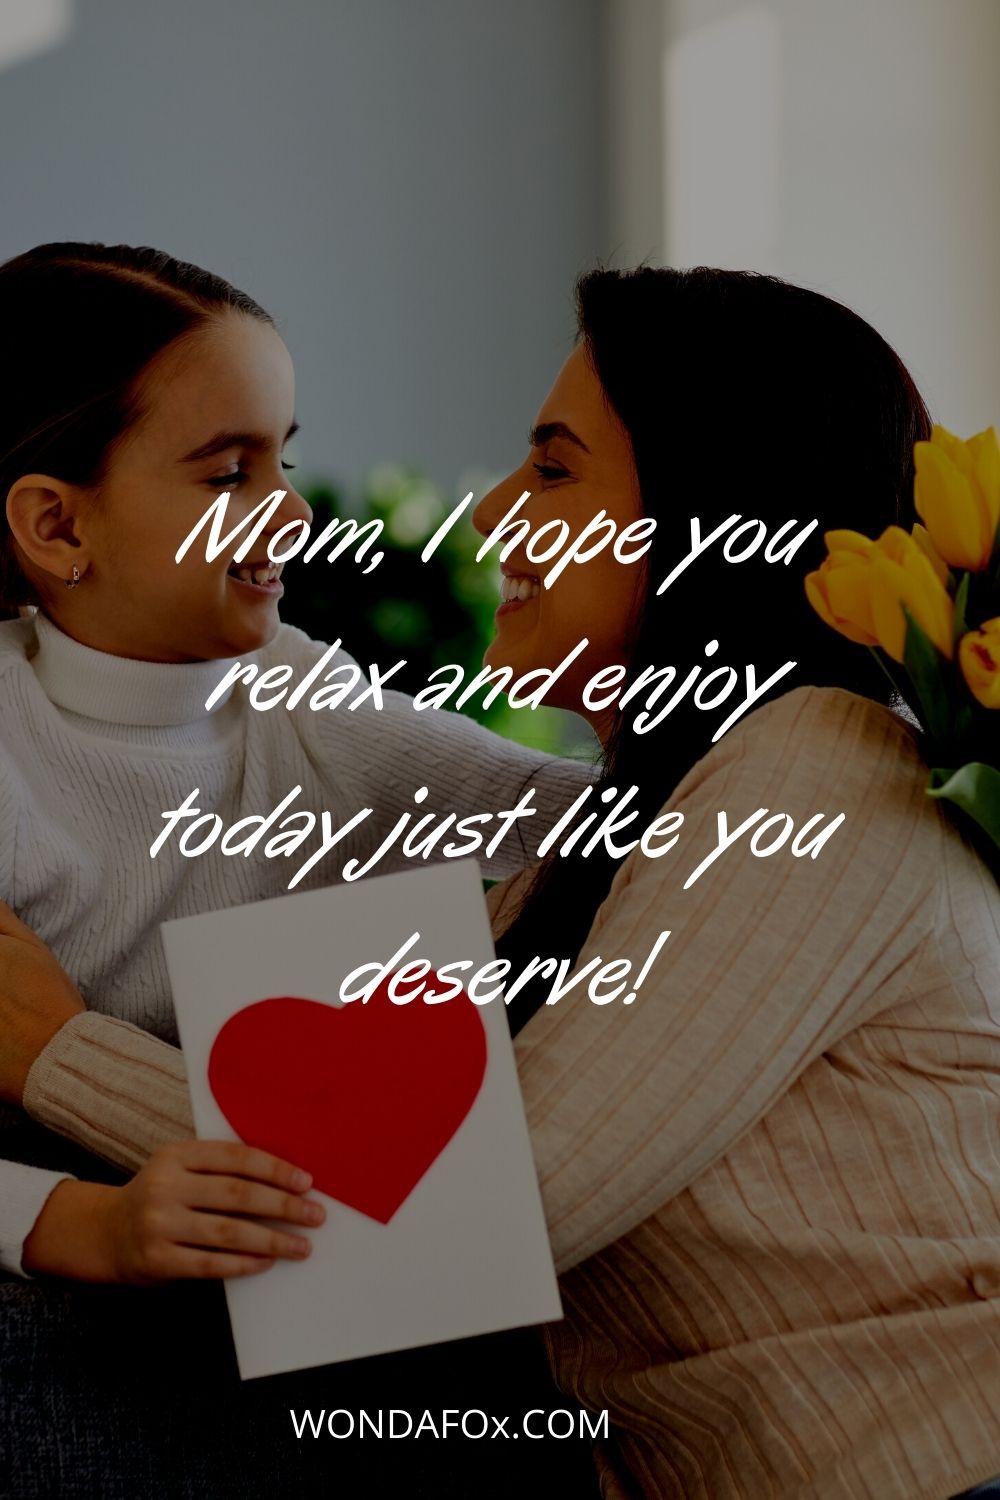 Mom, I hope you relax and enjoy today just like you deserve!